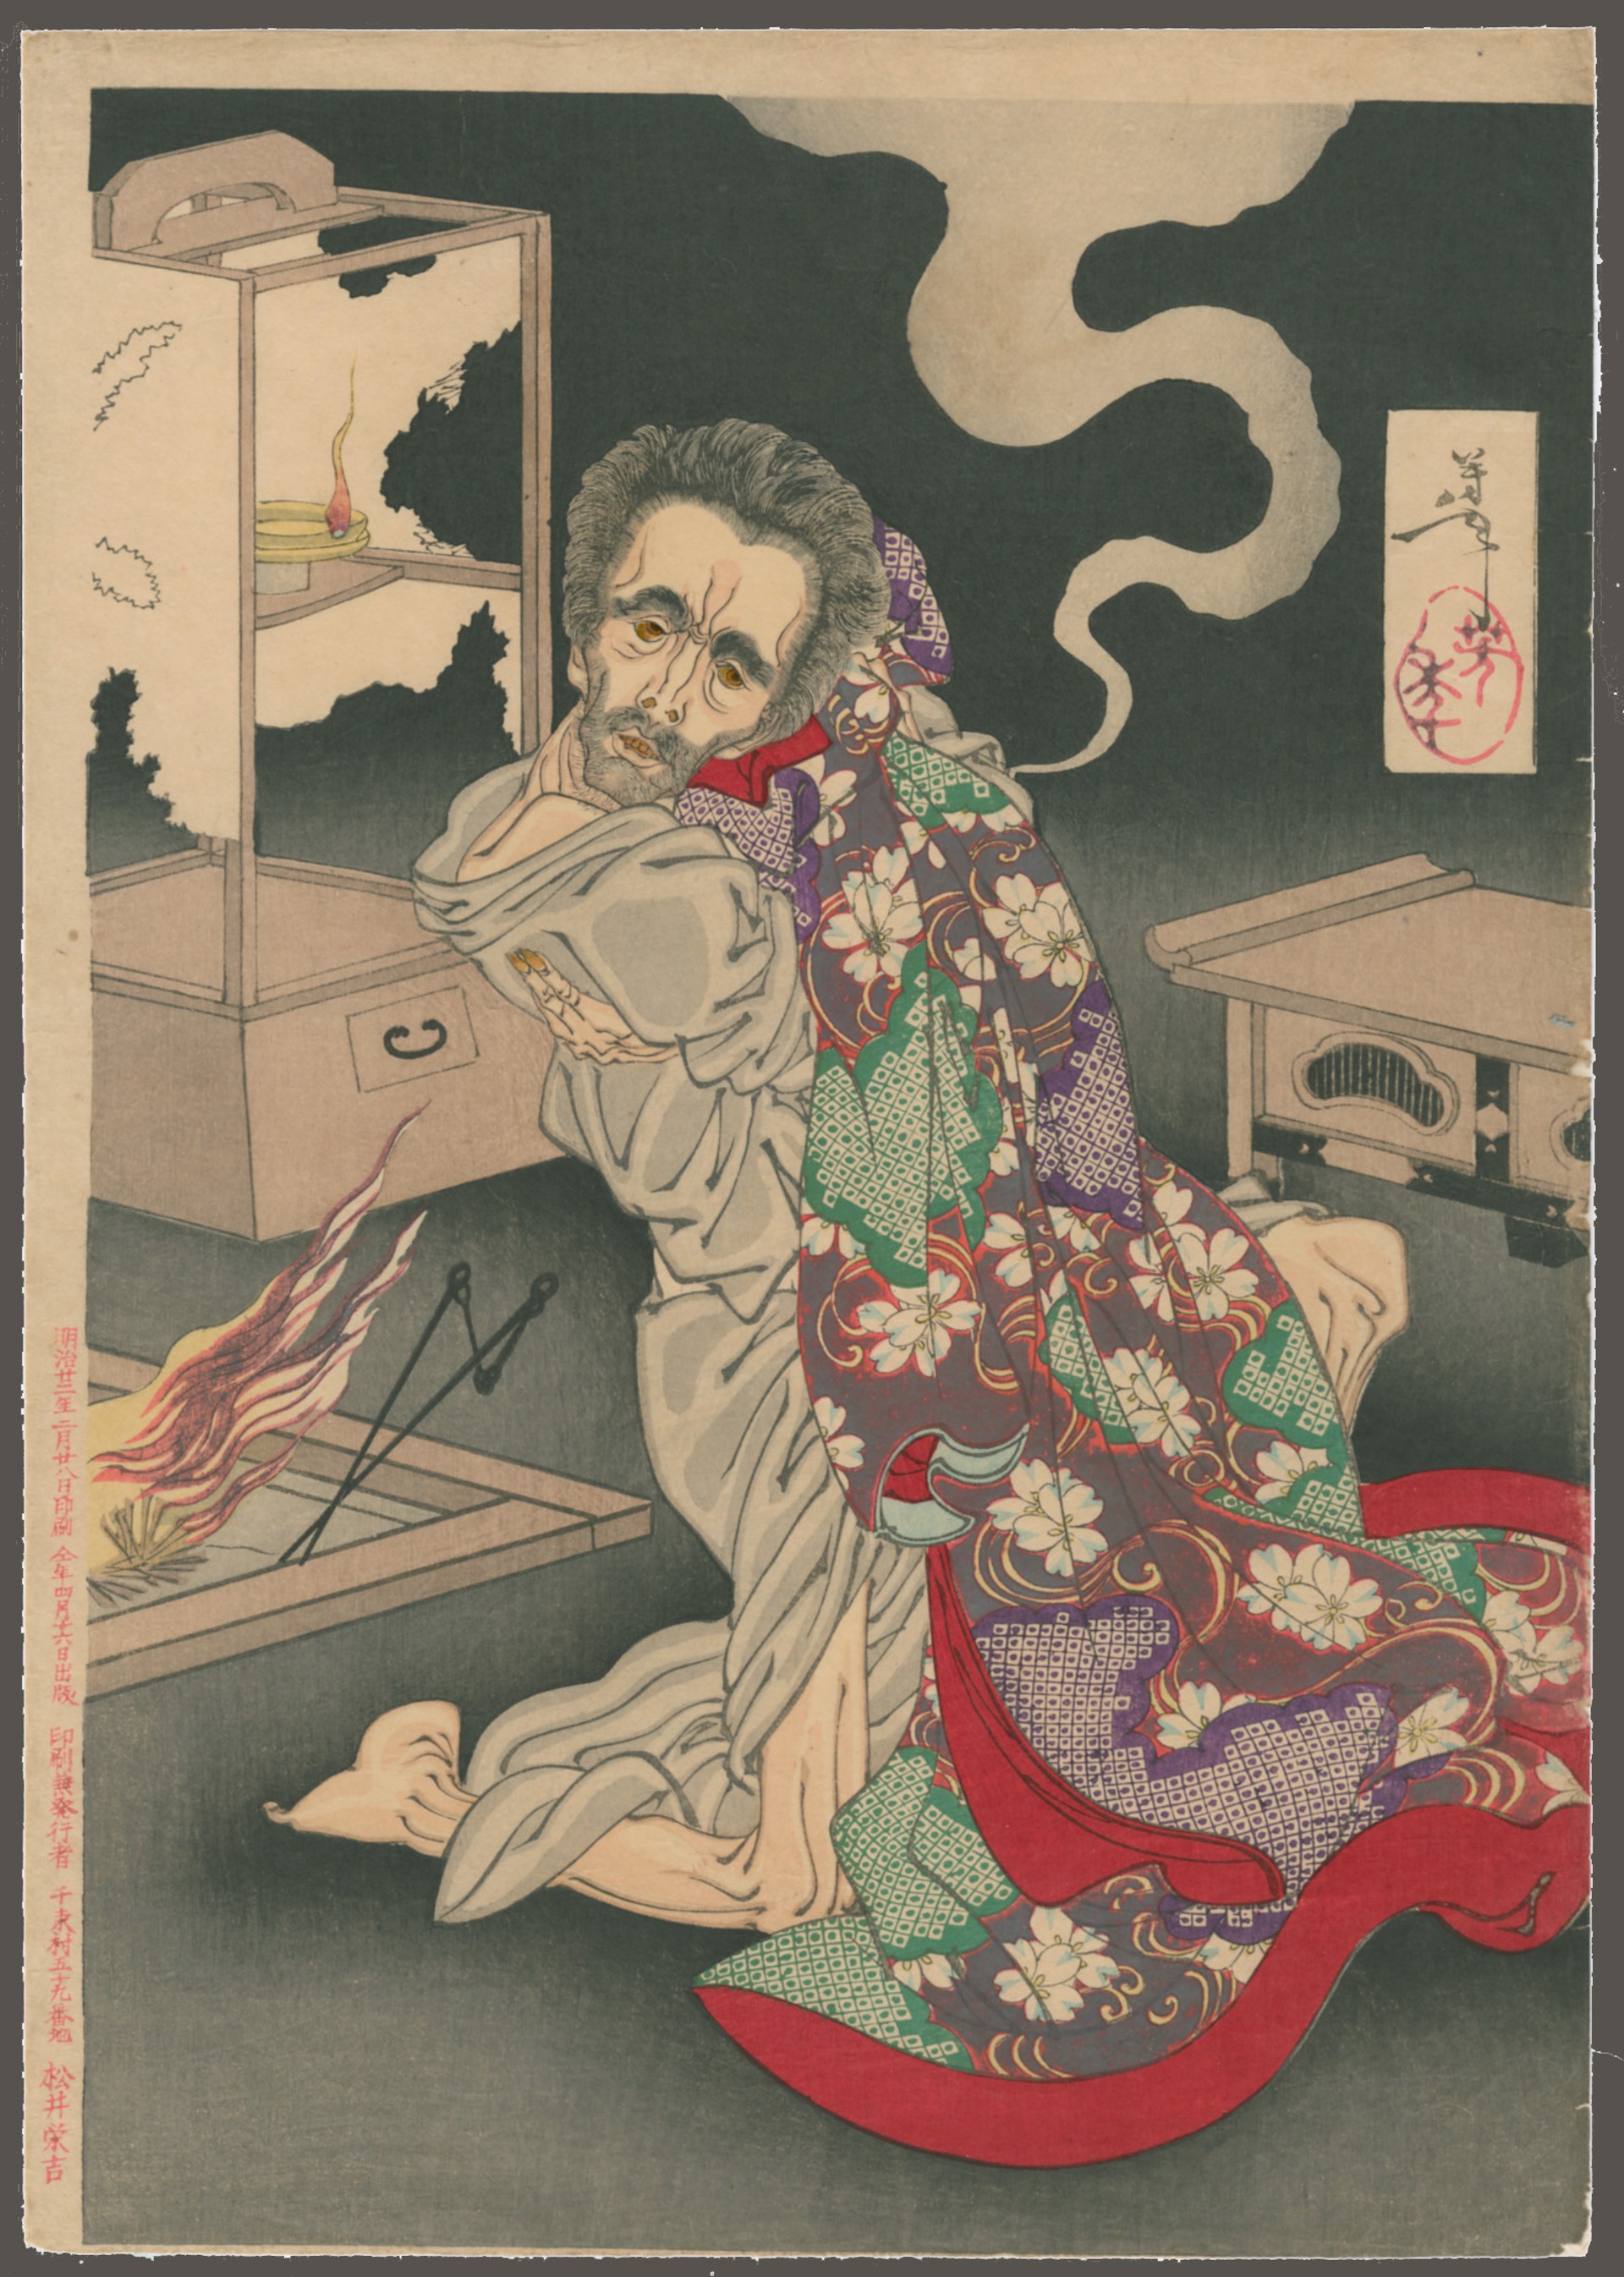 The Depravity of the Monk Seigen by Yoshitoshi